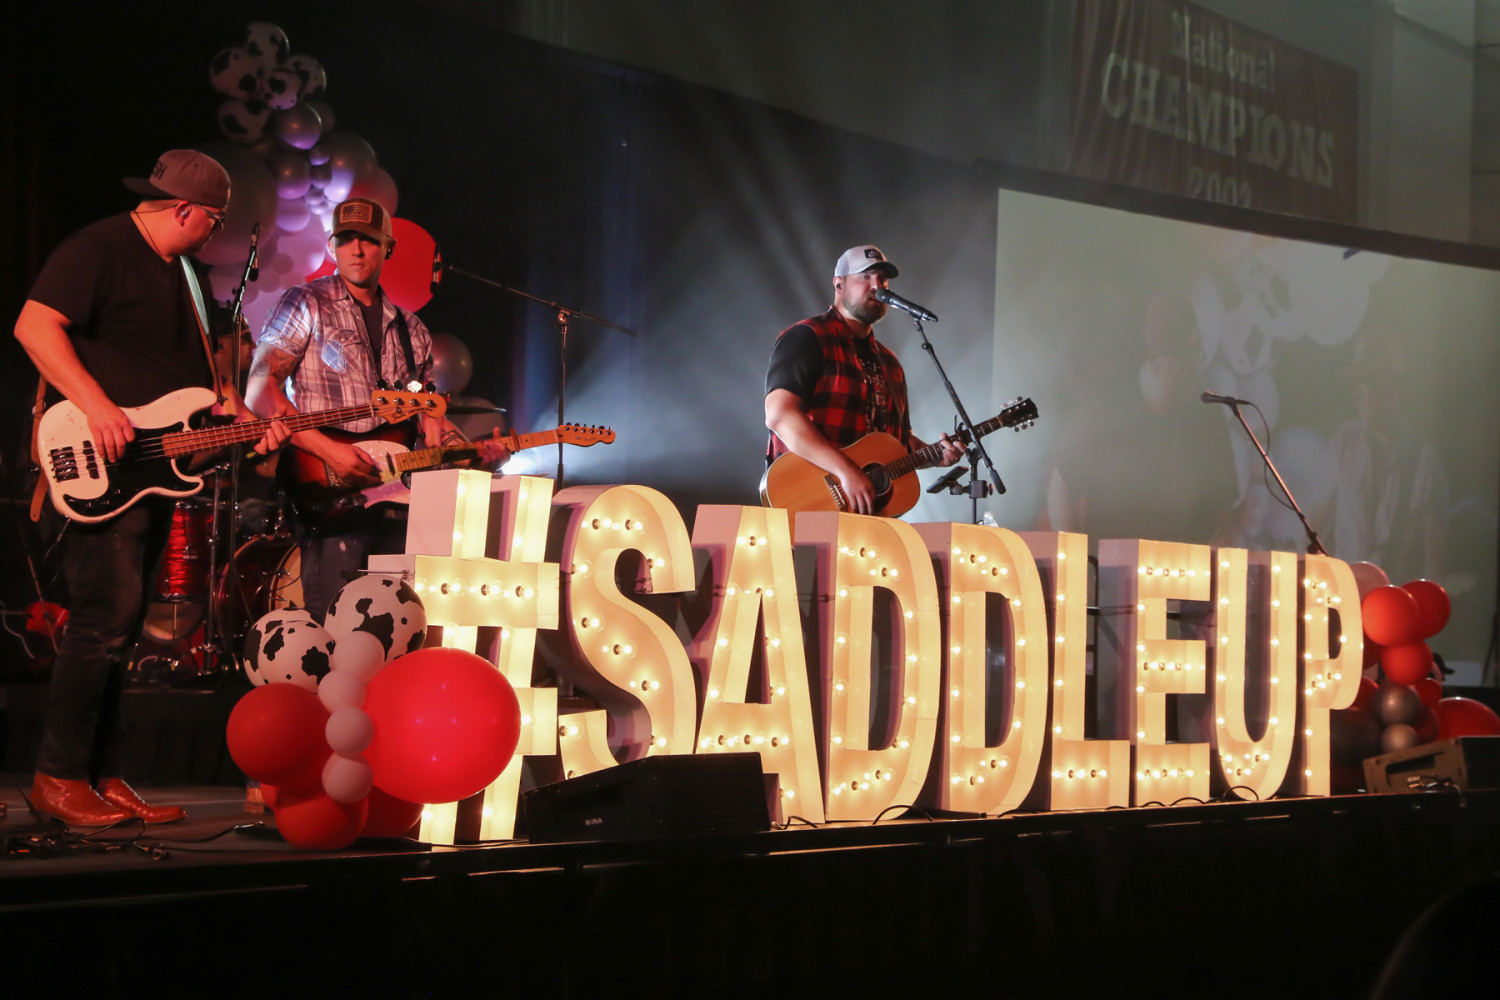 Our first Saddle Up concert!